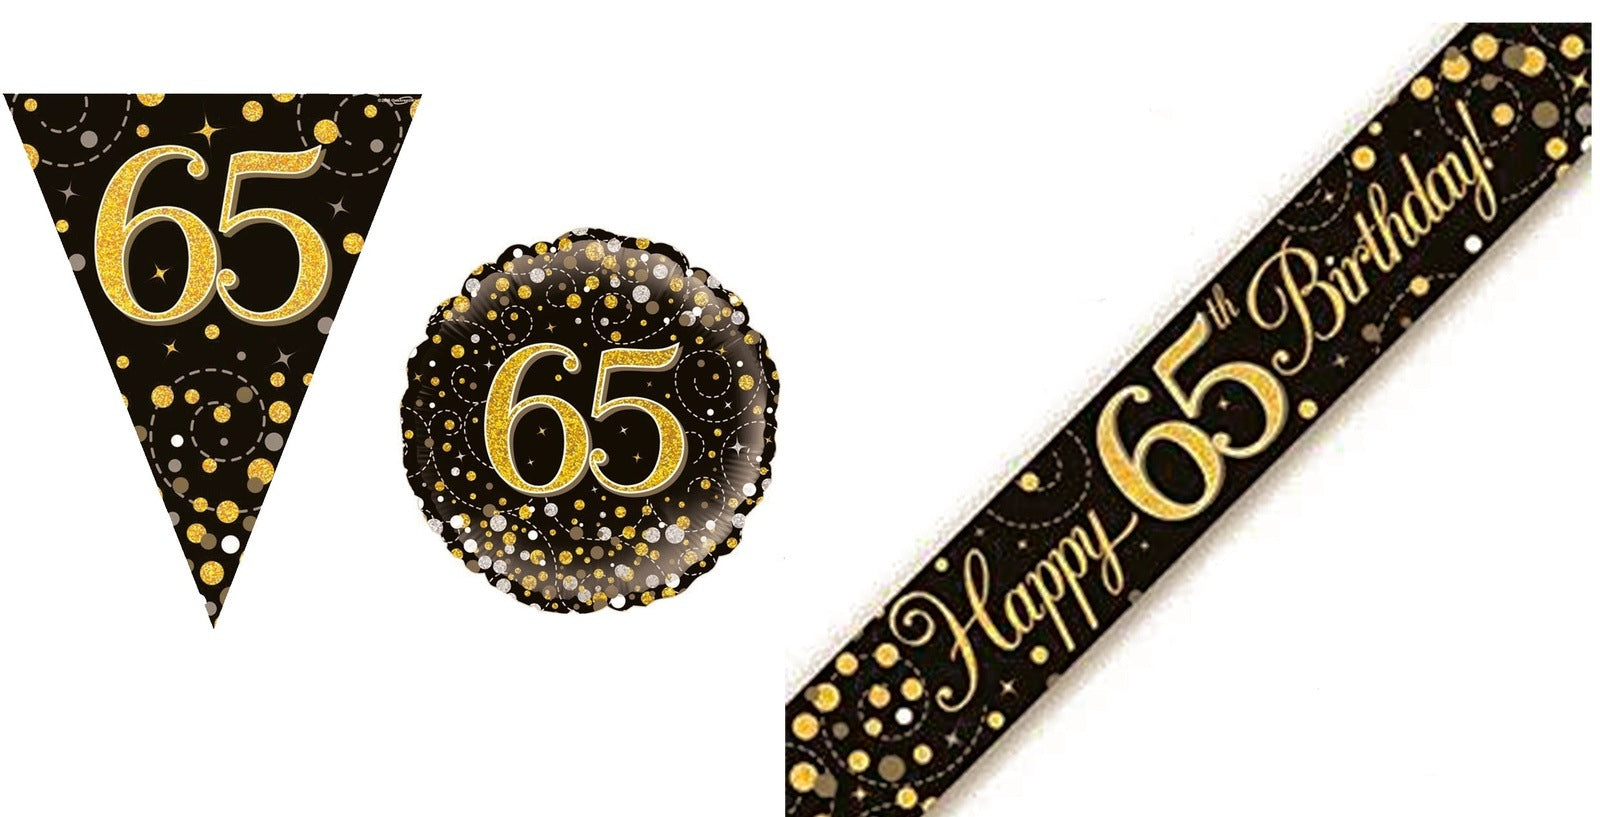 Black And Gold Bundle D Banner, Bunting, Foil Balloon Ages 16 to 90